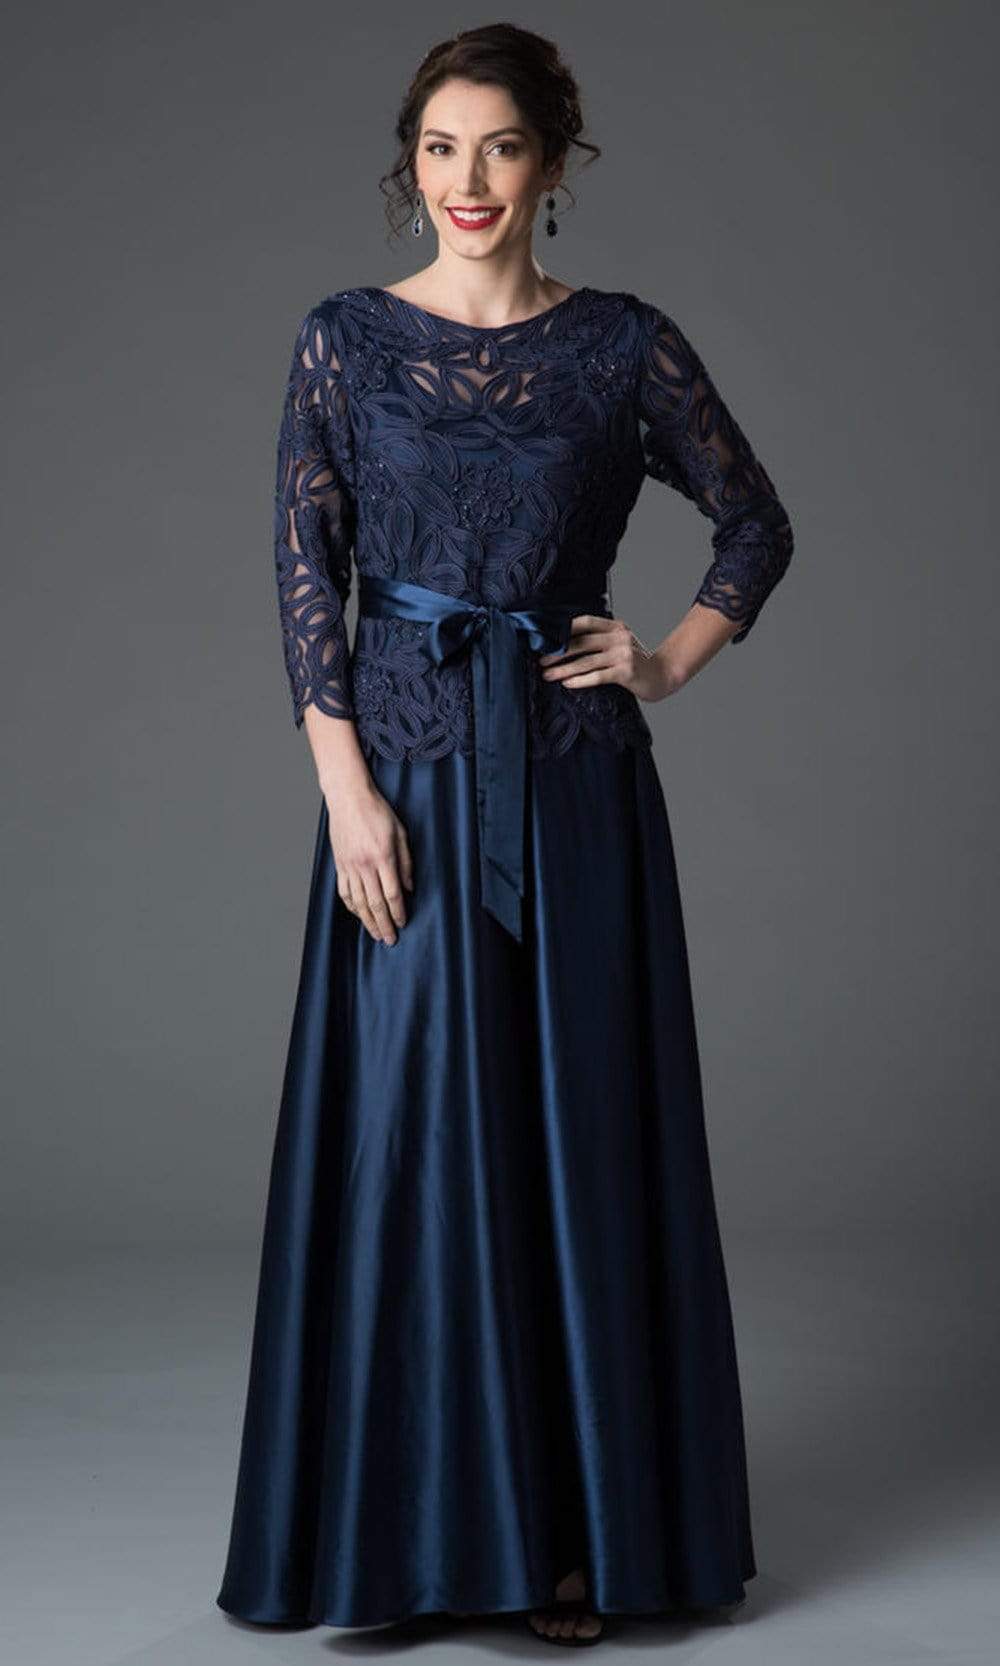 Soulmates - Embroidered Evening Gown 1601 - 1 pc Navy In Size 1X Available CCSALE 1X / Navy